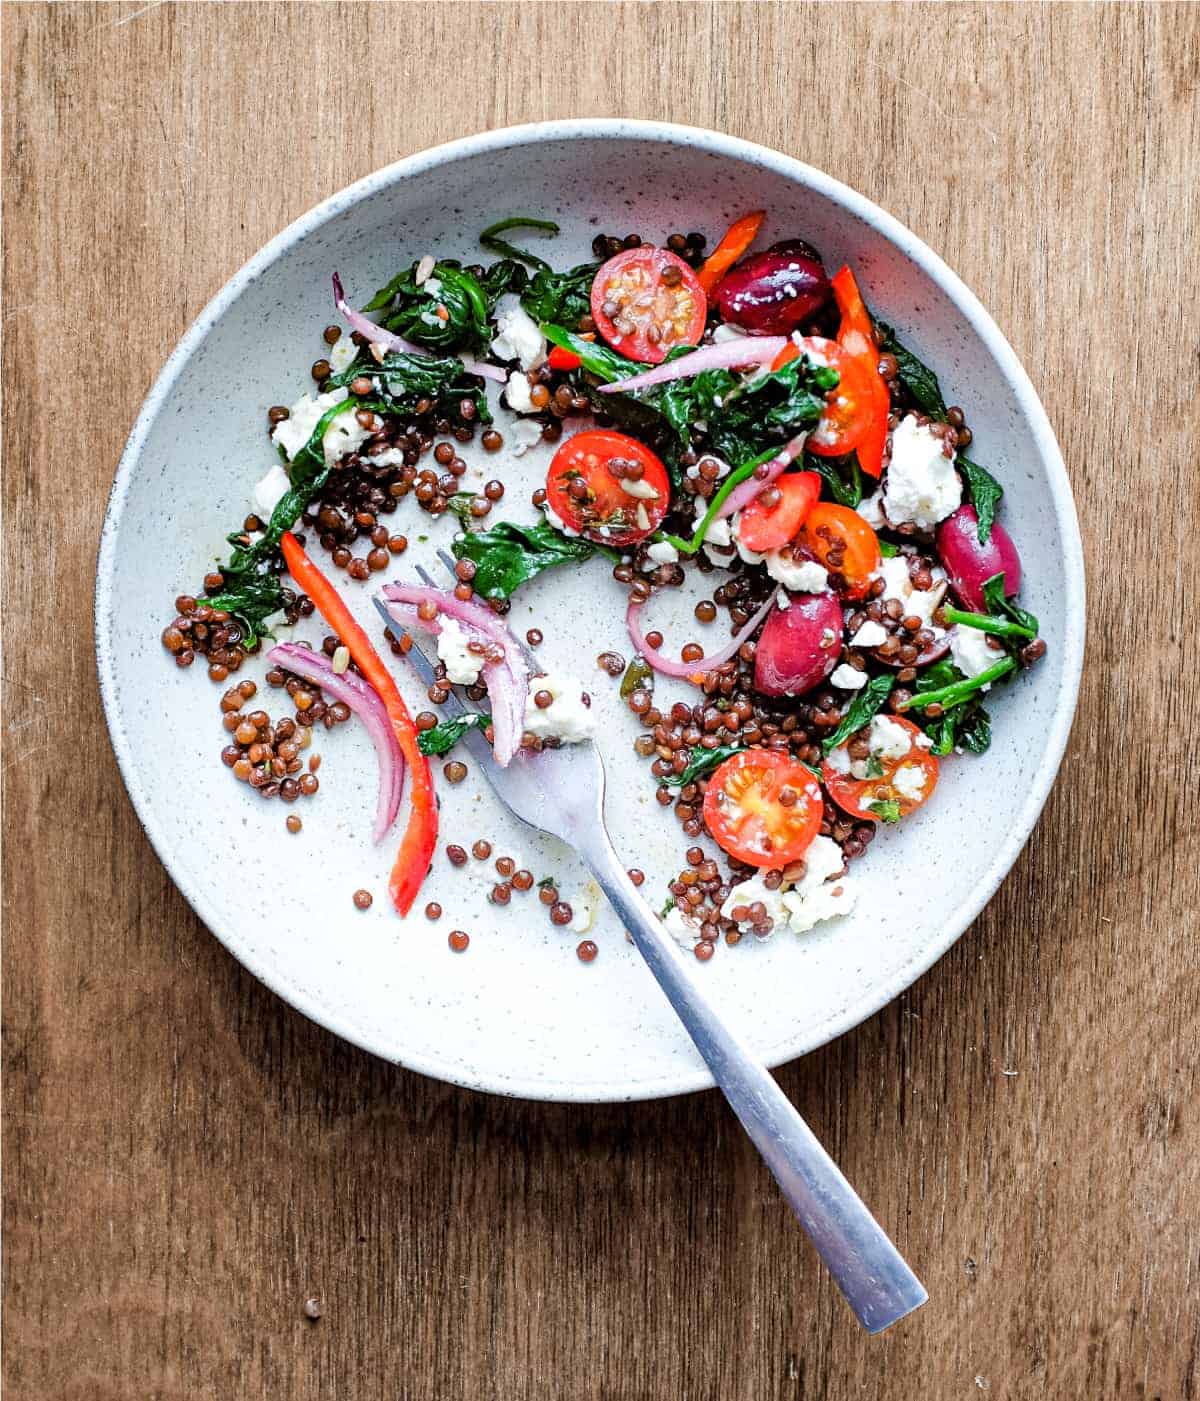 A bowl of Greek lentil salad featuring tomatoes, spinach, lentils, feta and red onion with a fork